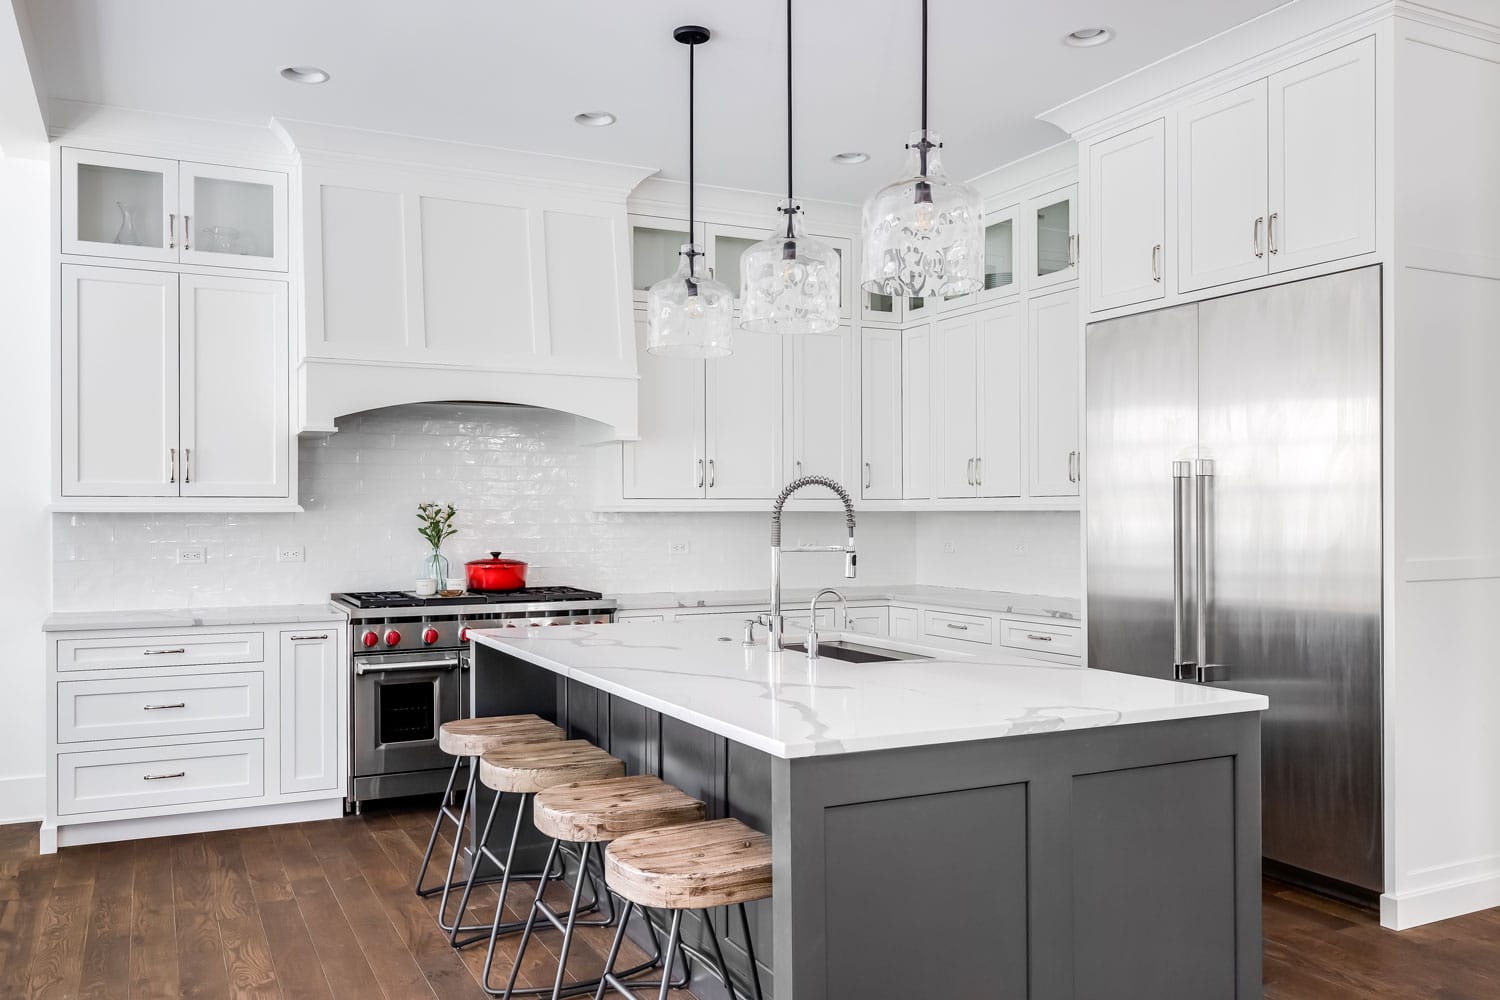 A large luxury kitchen with white granite countertops and cabinets